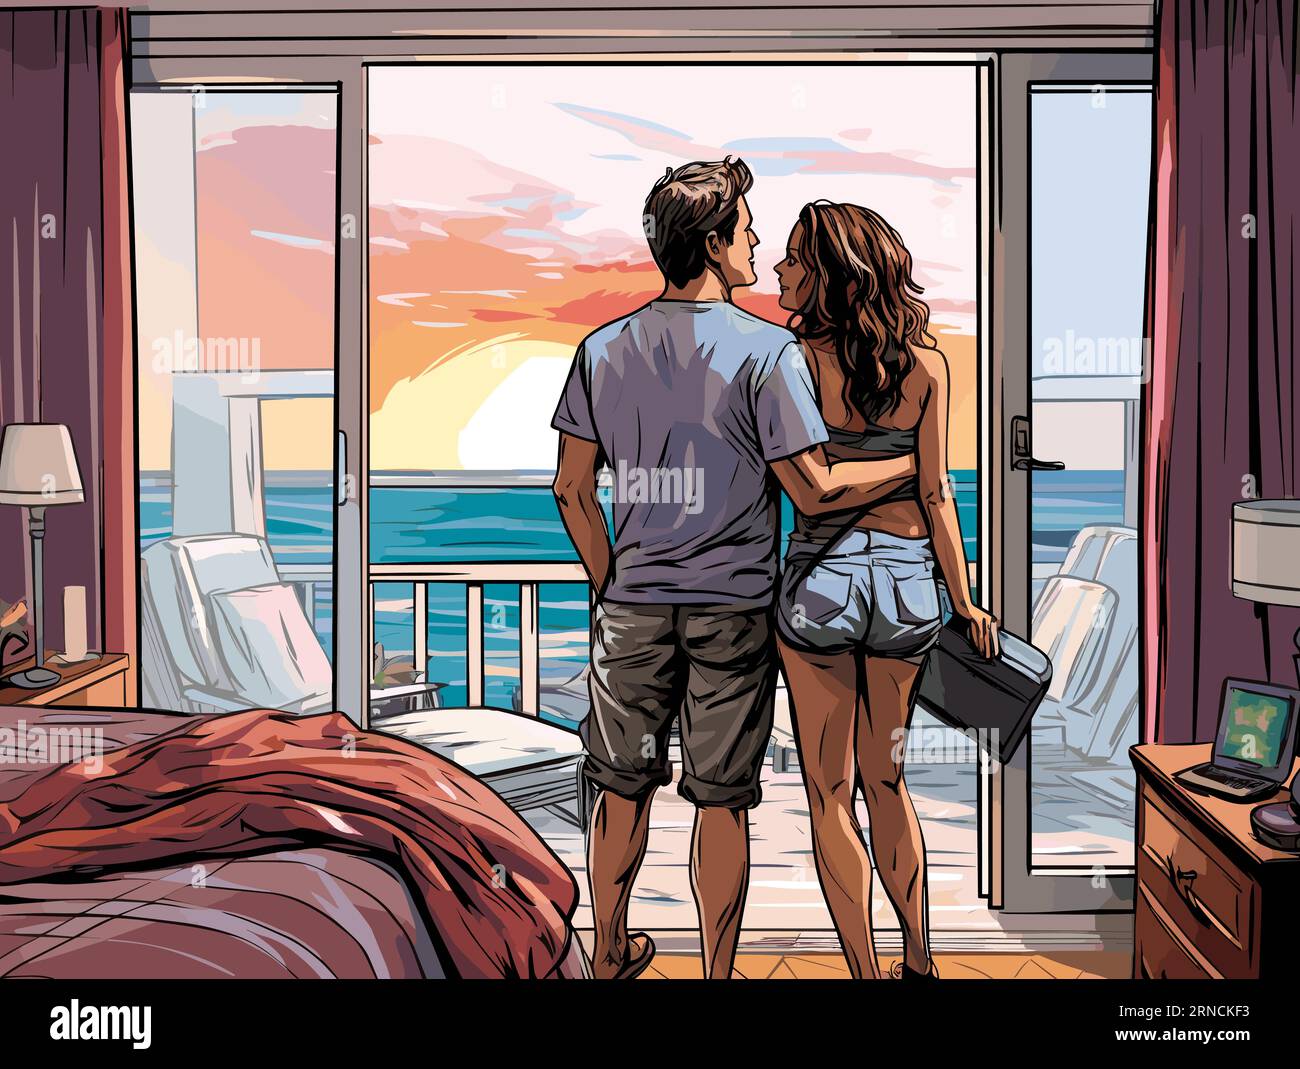 A Beautiful Couple In Front Of The Window, In The Style Of Detailed Comic Book Art, Realistic Scenery, Horizons, Comic Art Stock Vector